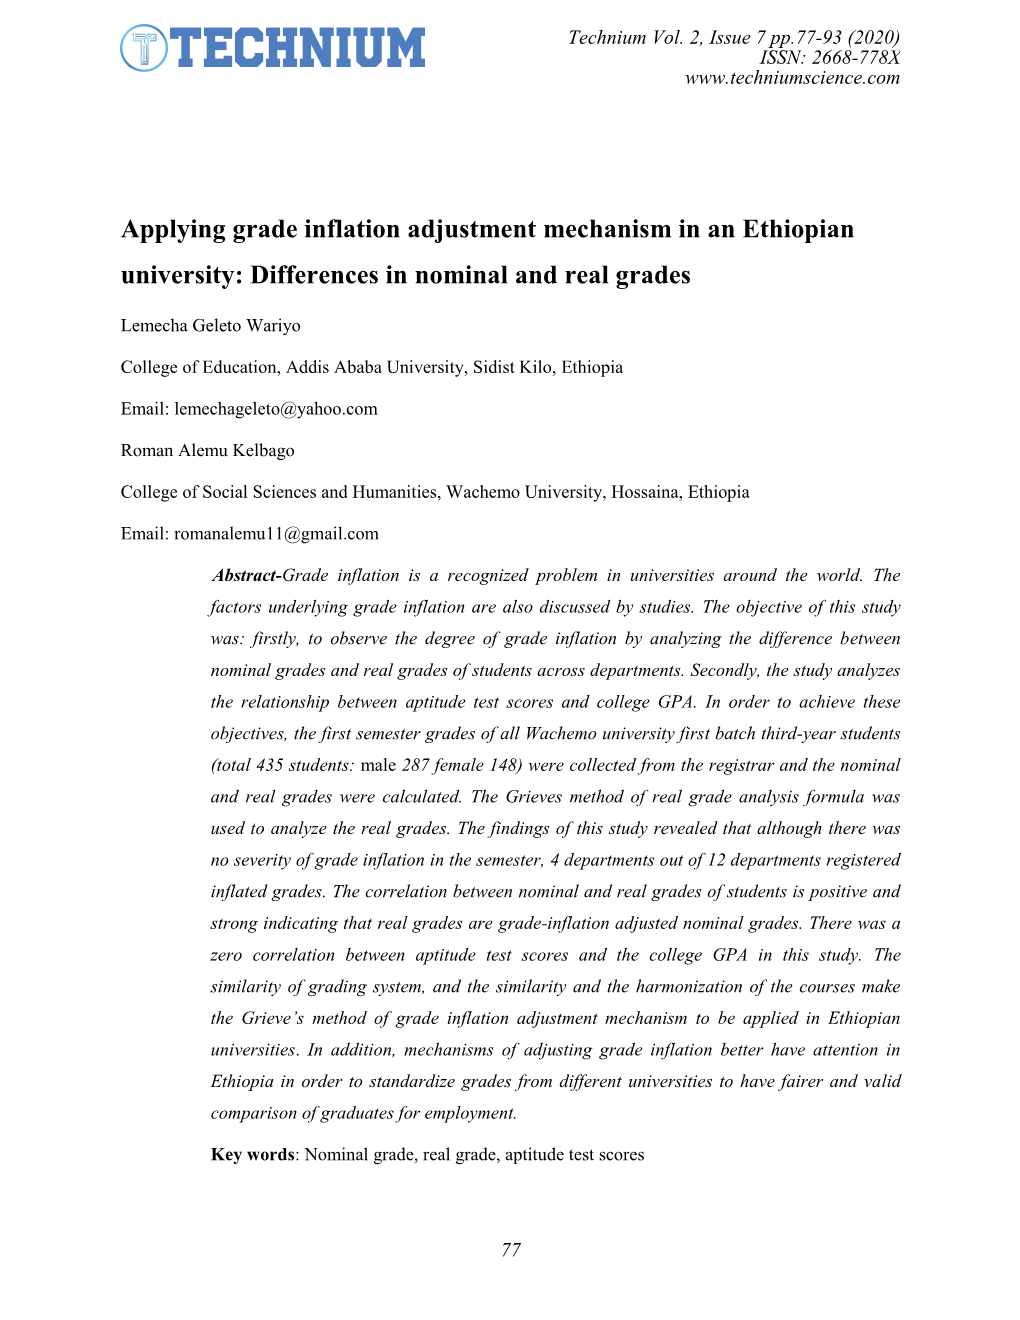 Applying Grade Inflation Adjustment Mechanism in an Ethiopian University: Differences in Nominal and Real Grades